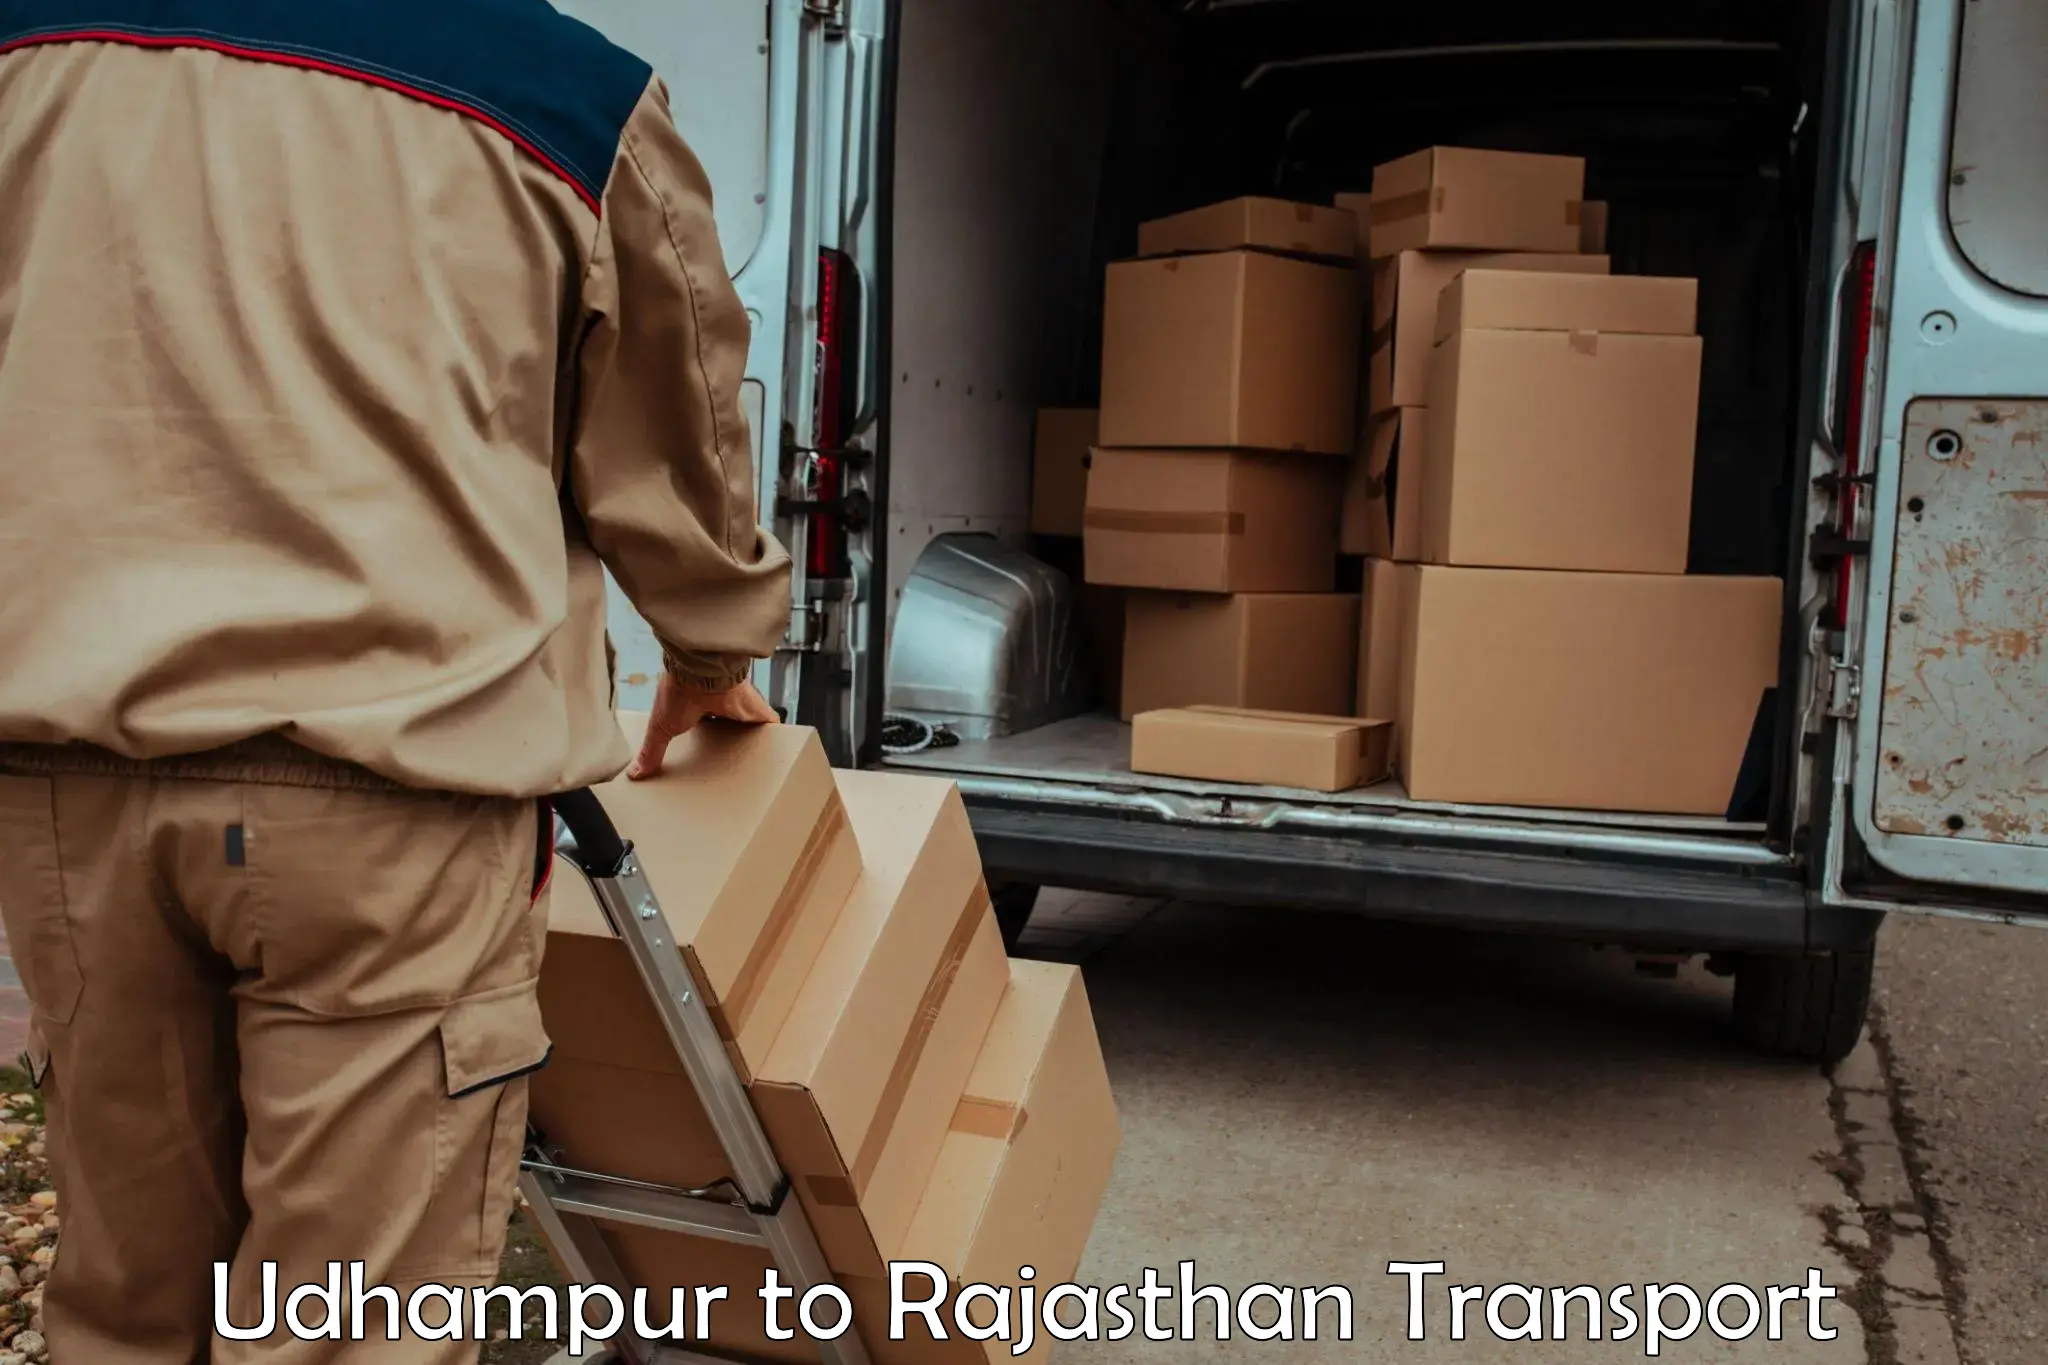 Cargo train transport services Udhampur to Rajasthan